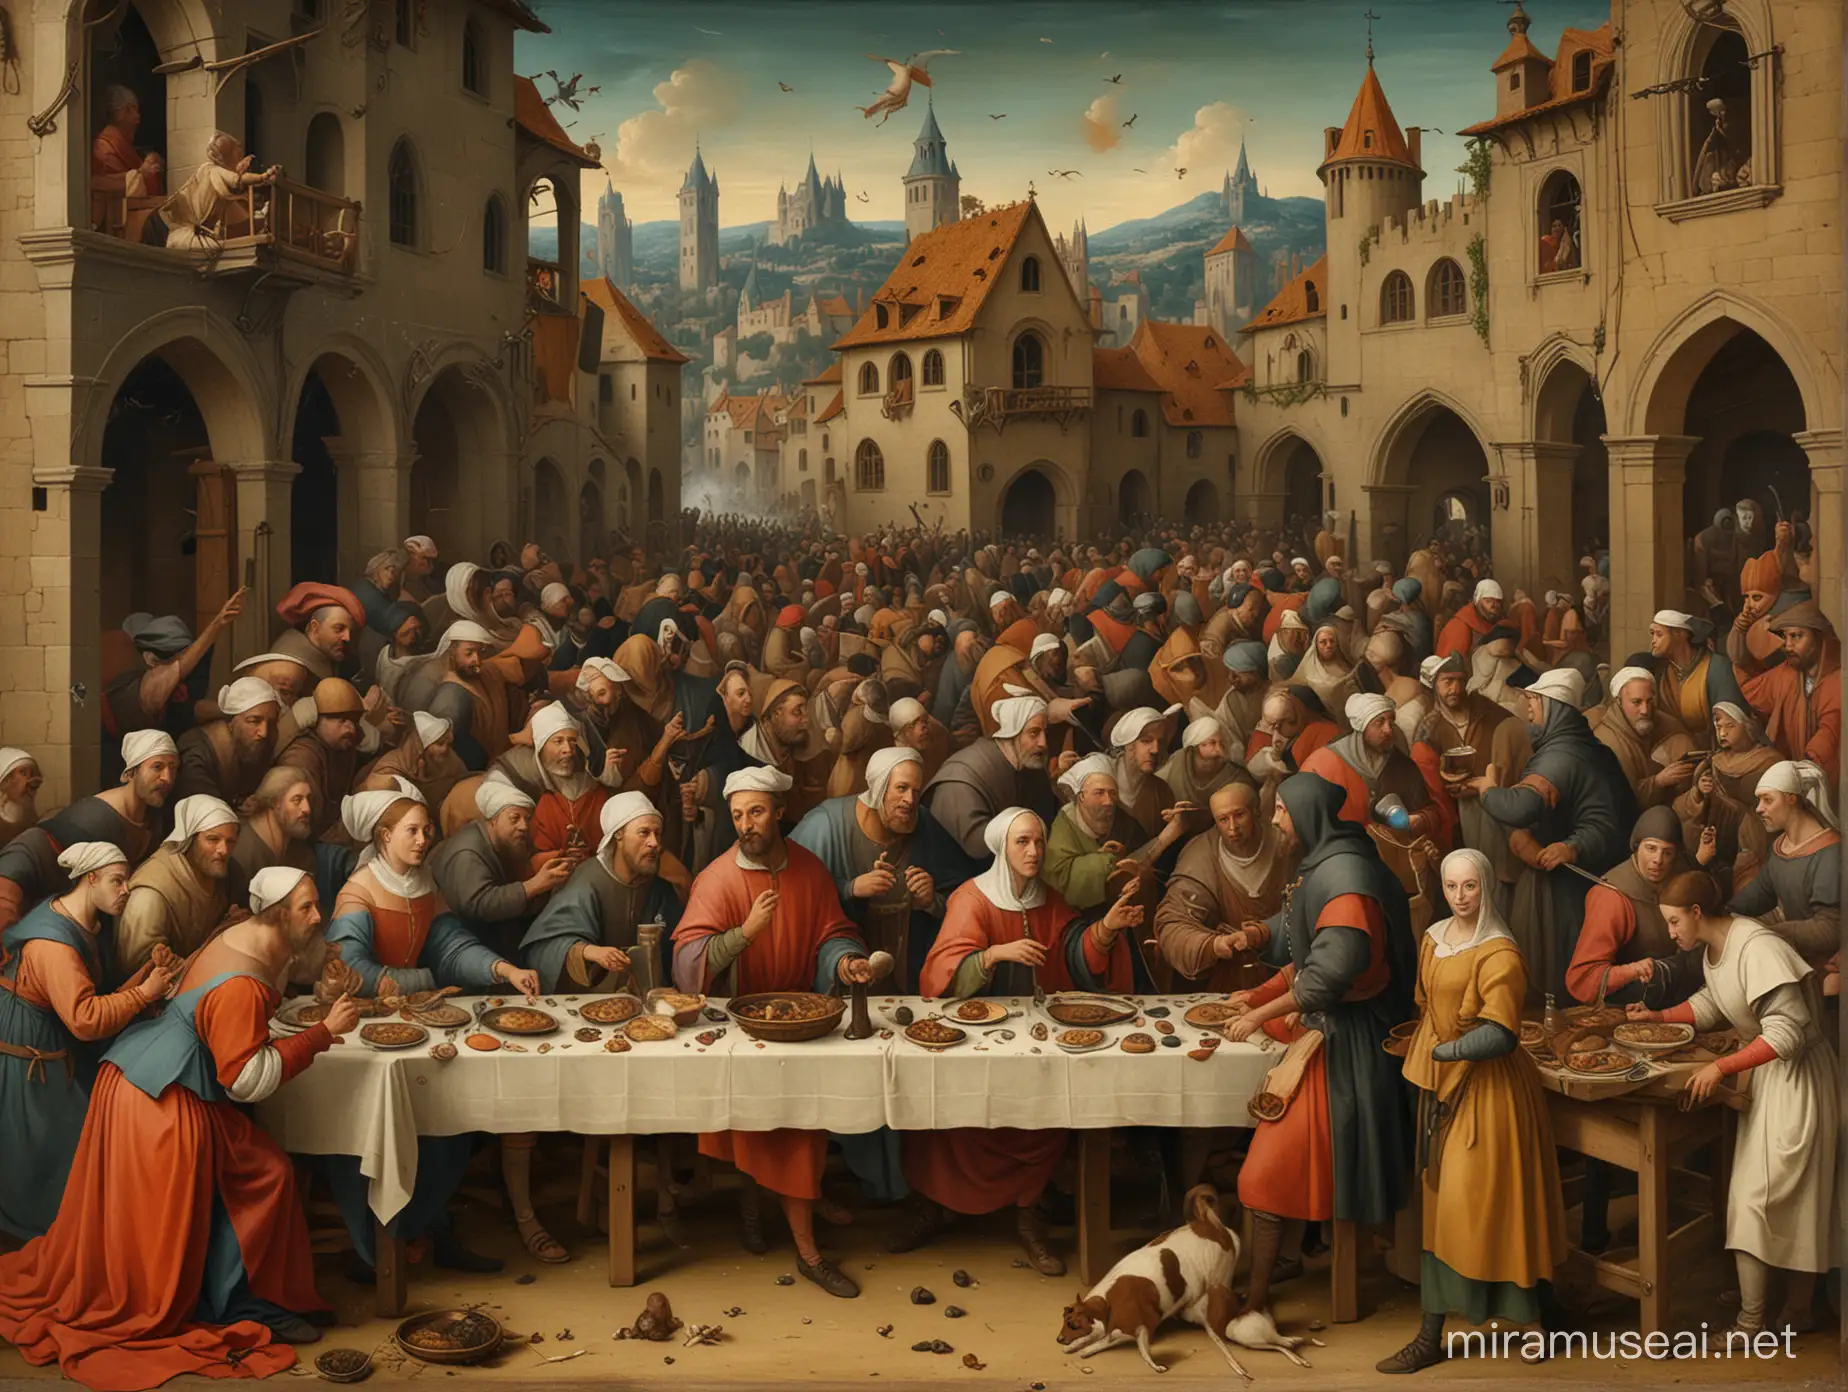 create a medieval painting “feast during the plague” in the style of Bosch and Leonardo Da Vinci